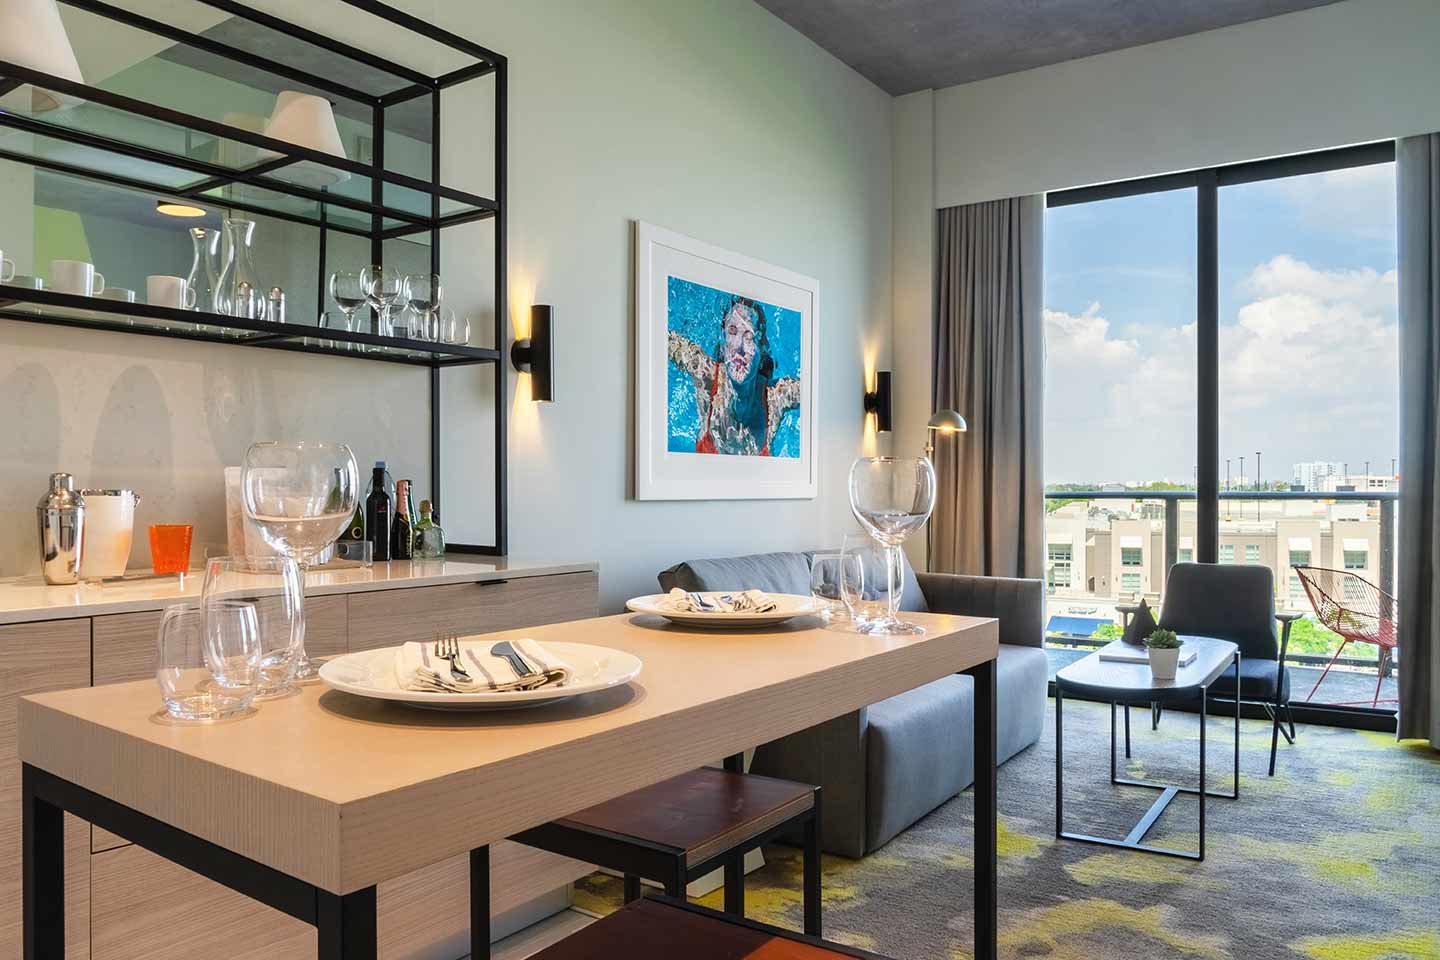 Kitchen dining area for a hotel suite, with sofa in the background, balcony view of the city